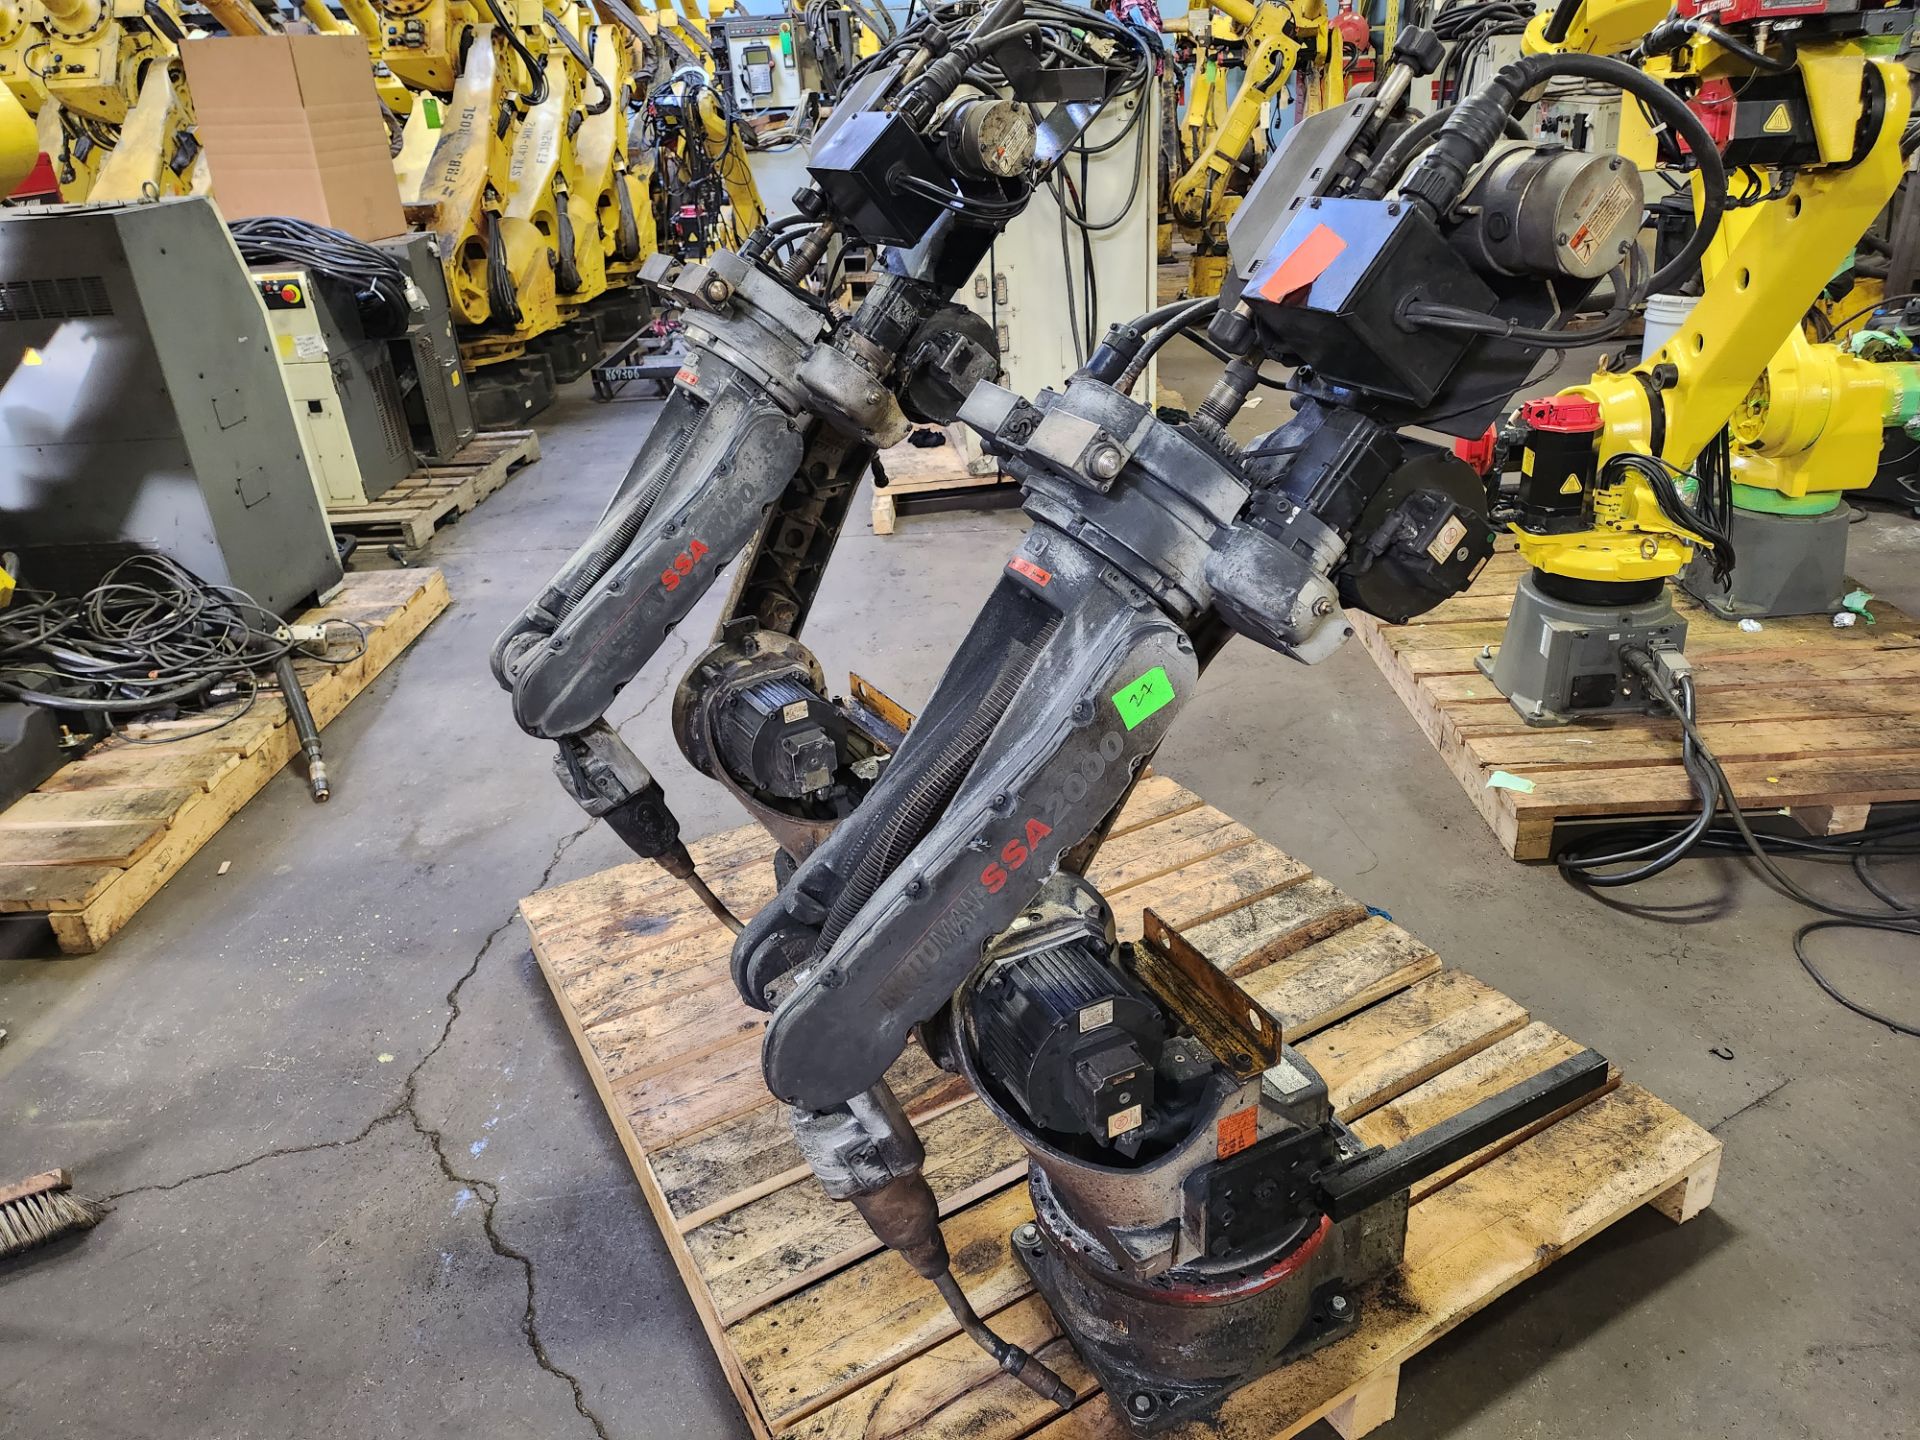 Lot of 4 (4 units) 2007 Motoman SSA 2000 Welding Robots Complete with Auto Axcess 450 power source